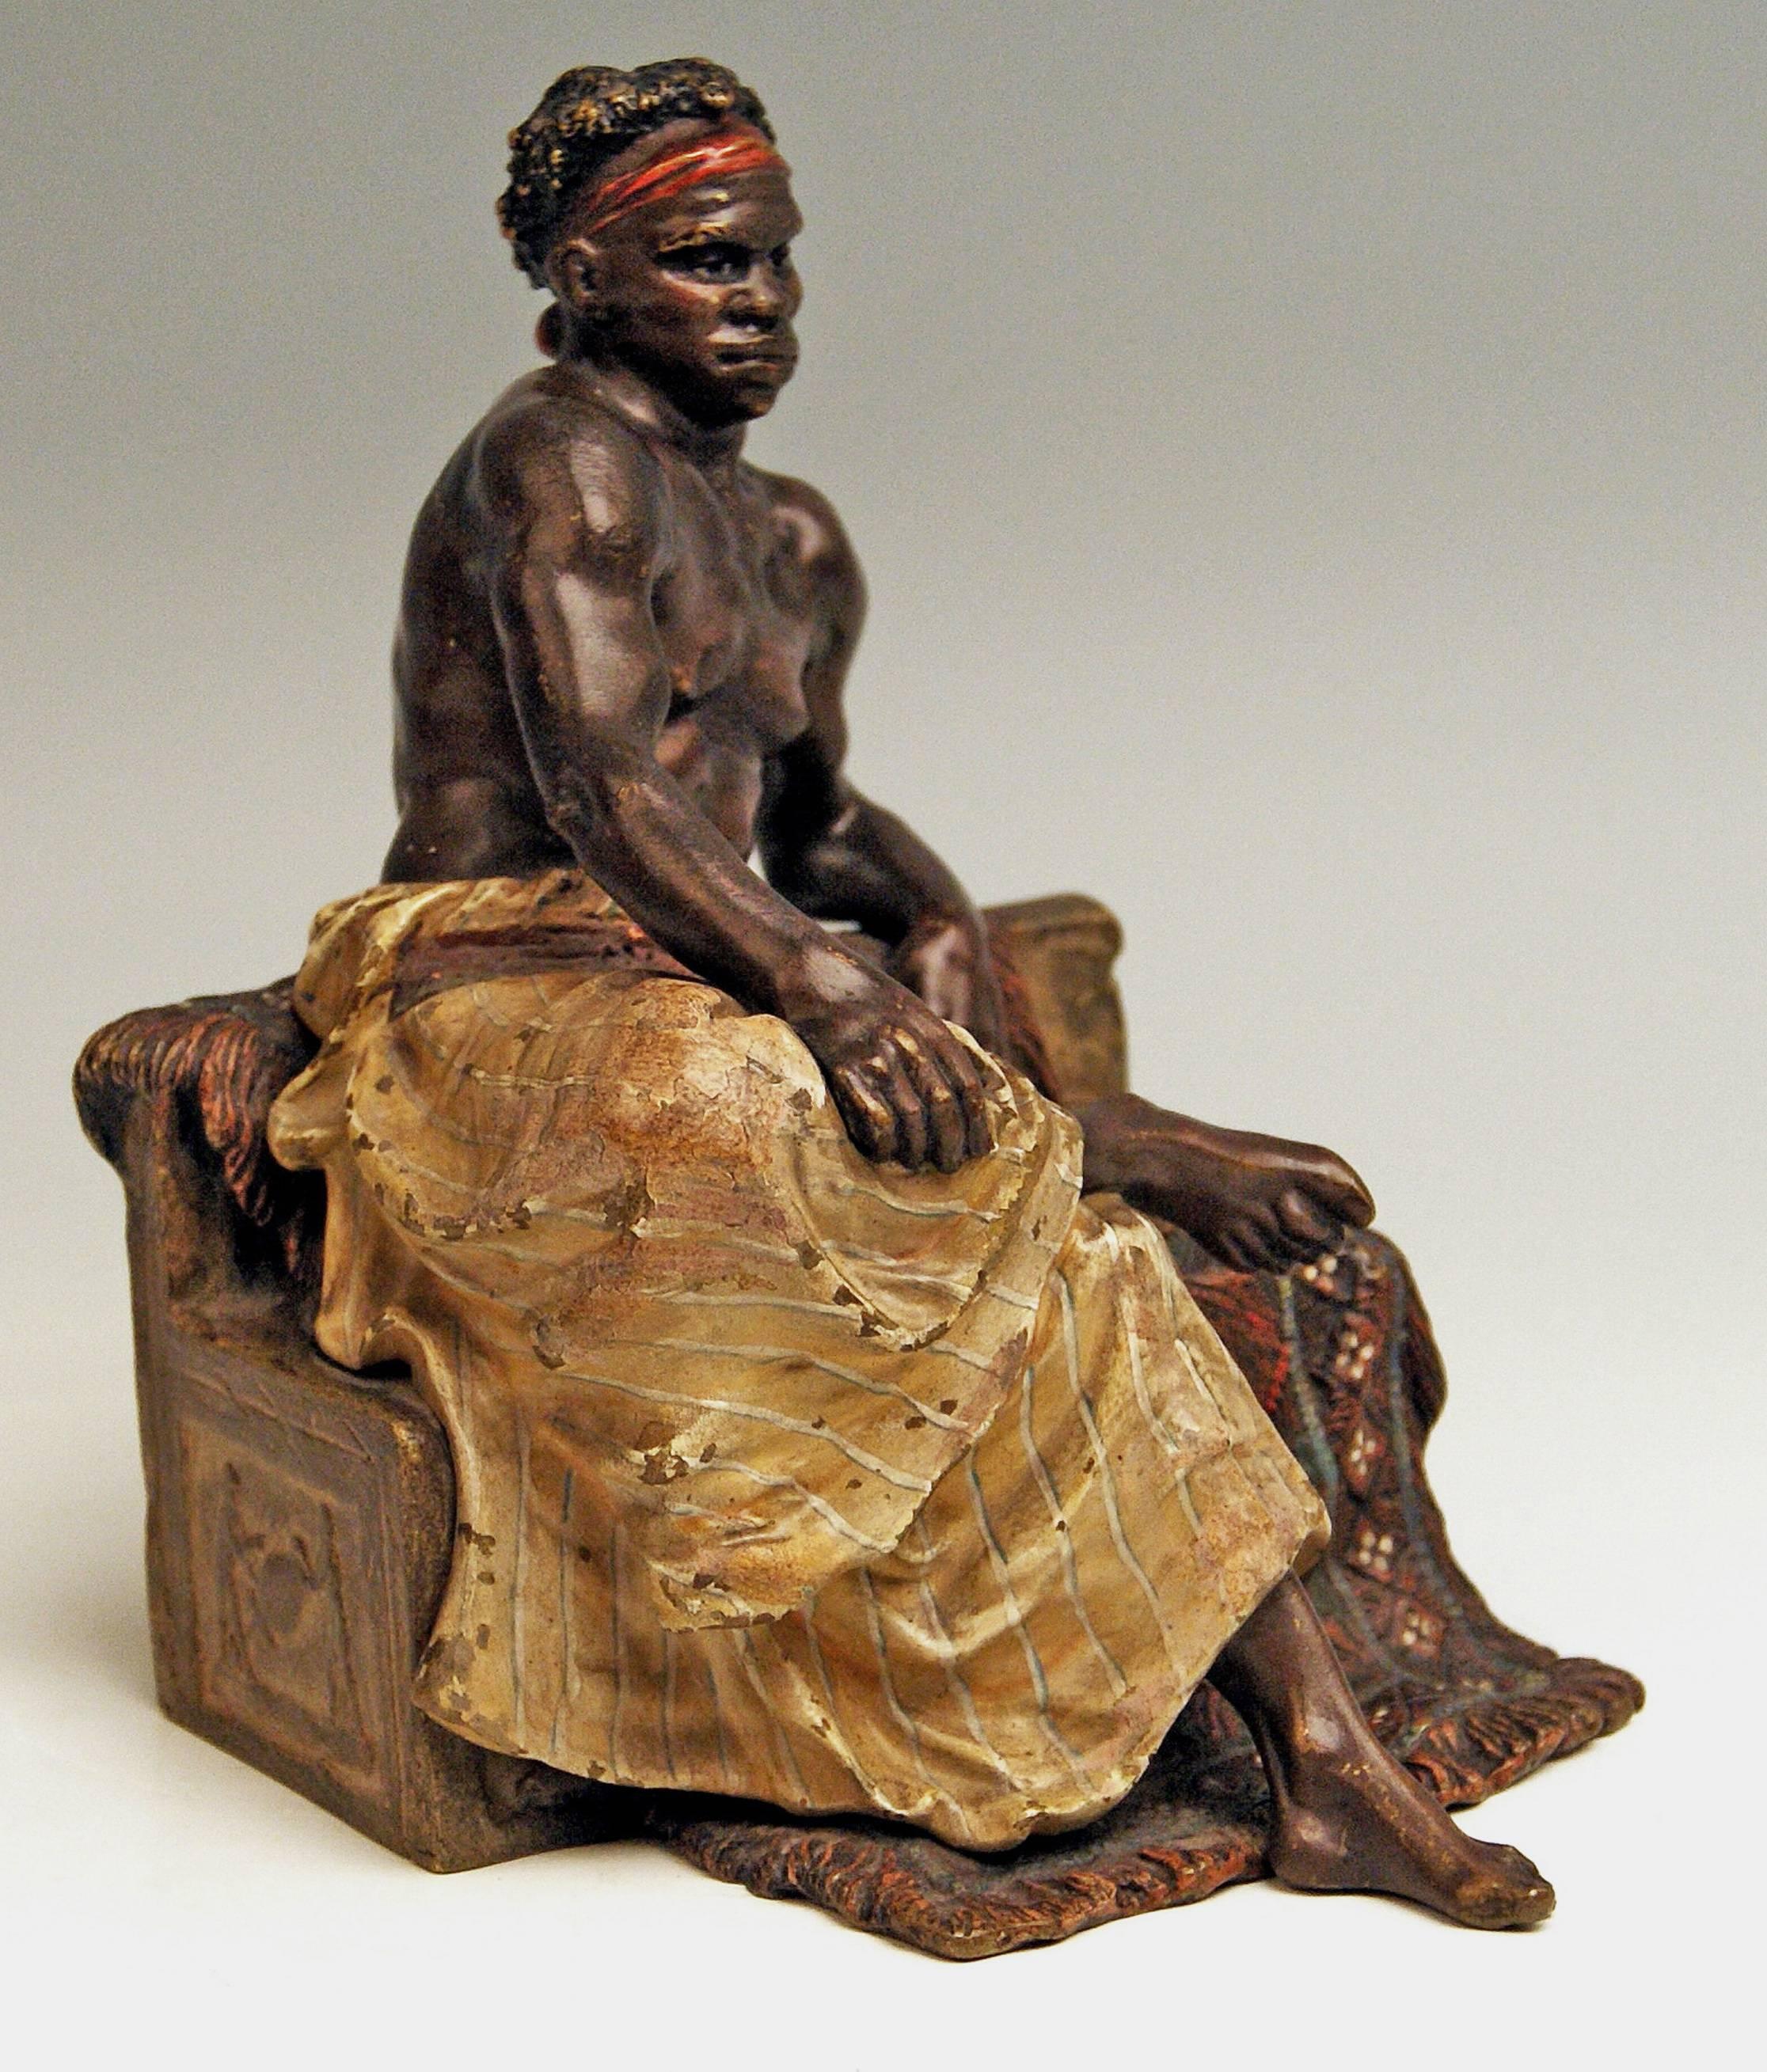 Stunning bronze figurine: Black man having sat down on bench.
 
This excellent Vienna bronze figurine is of finest manufacturing quality: 
It is a black handsome young man with red ribbon in curled hair / his upper body is unclad, the lower body